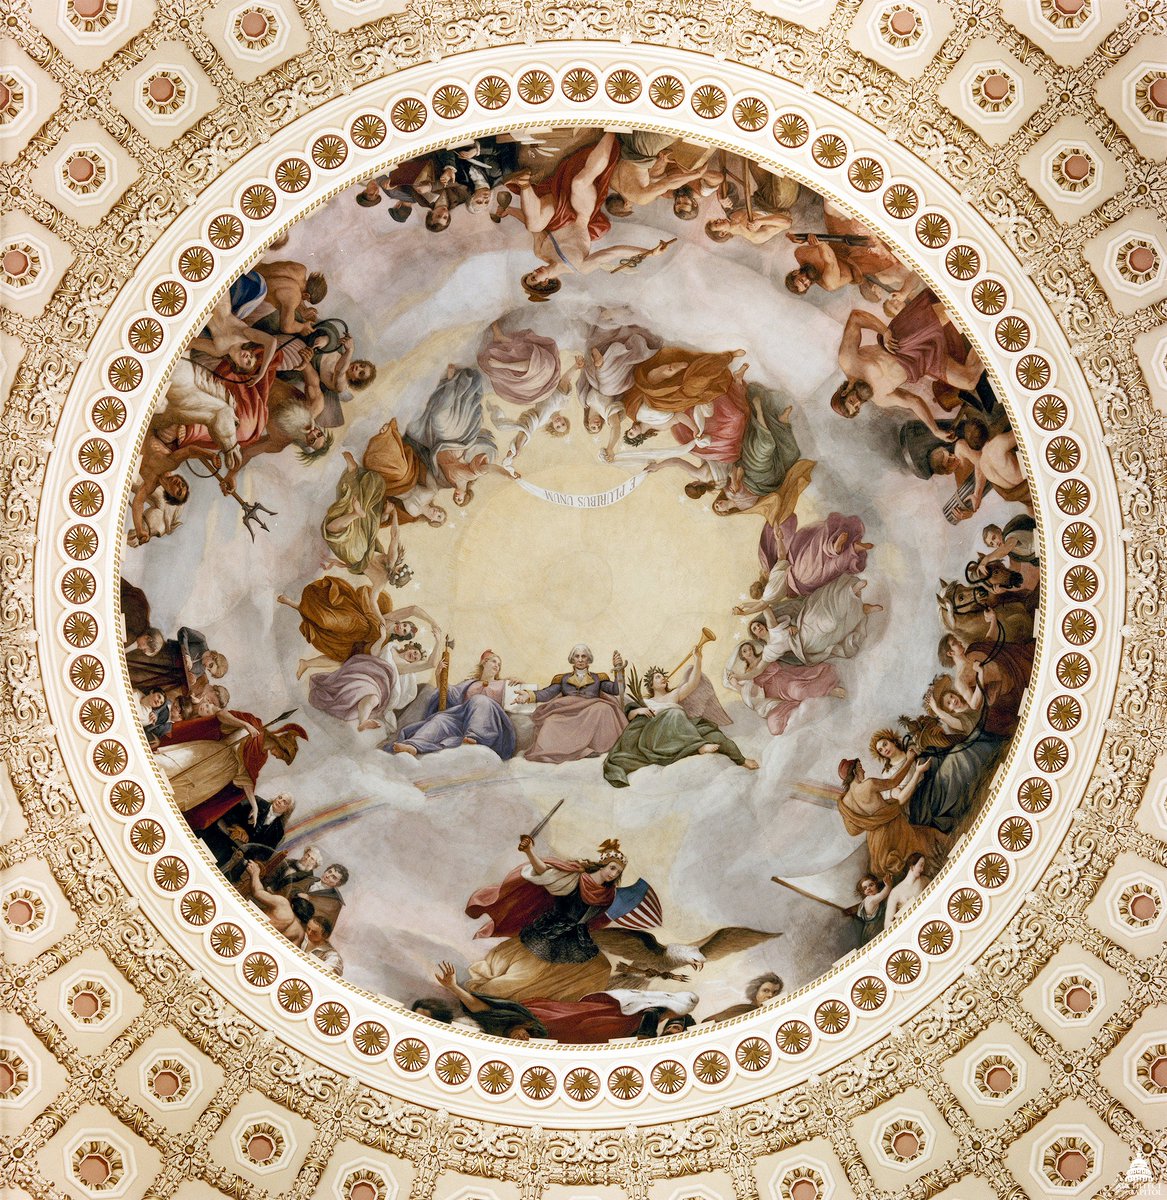 The state as a religion, some thoughts. The below fresco is called the Apotheosis of Washington and is located in the Capitol Rotunda of the US Capitol building. It depicts George Washington as he ascends into heaven on a cloud.